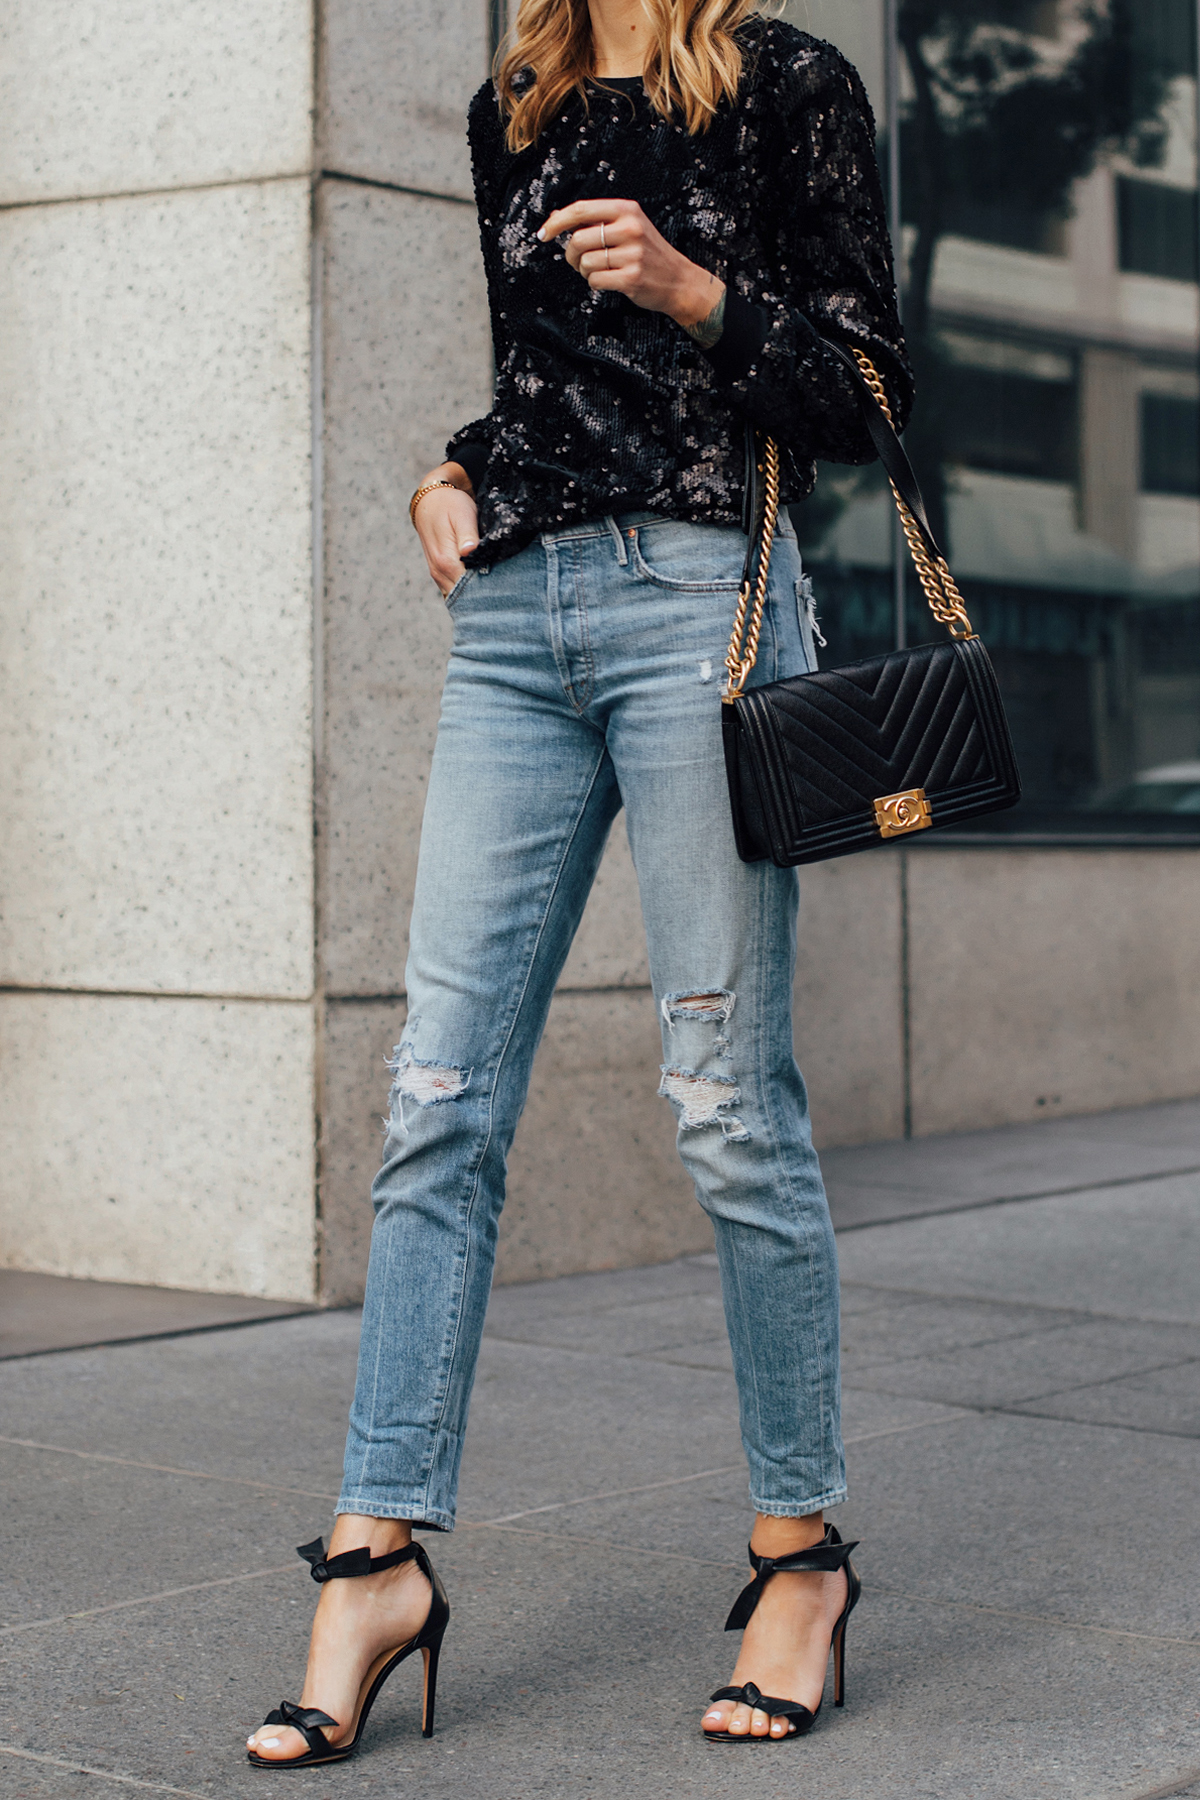 Blonde Woman Wearing Black Sequin Top Ripped Skinny Jeans Chanel Black Boy Bag Black Ankle Tie Heeled Sandals Fashion Jackson San Diego Fashion Blogger Street Style NYE Outfit